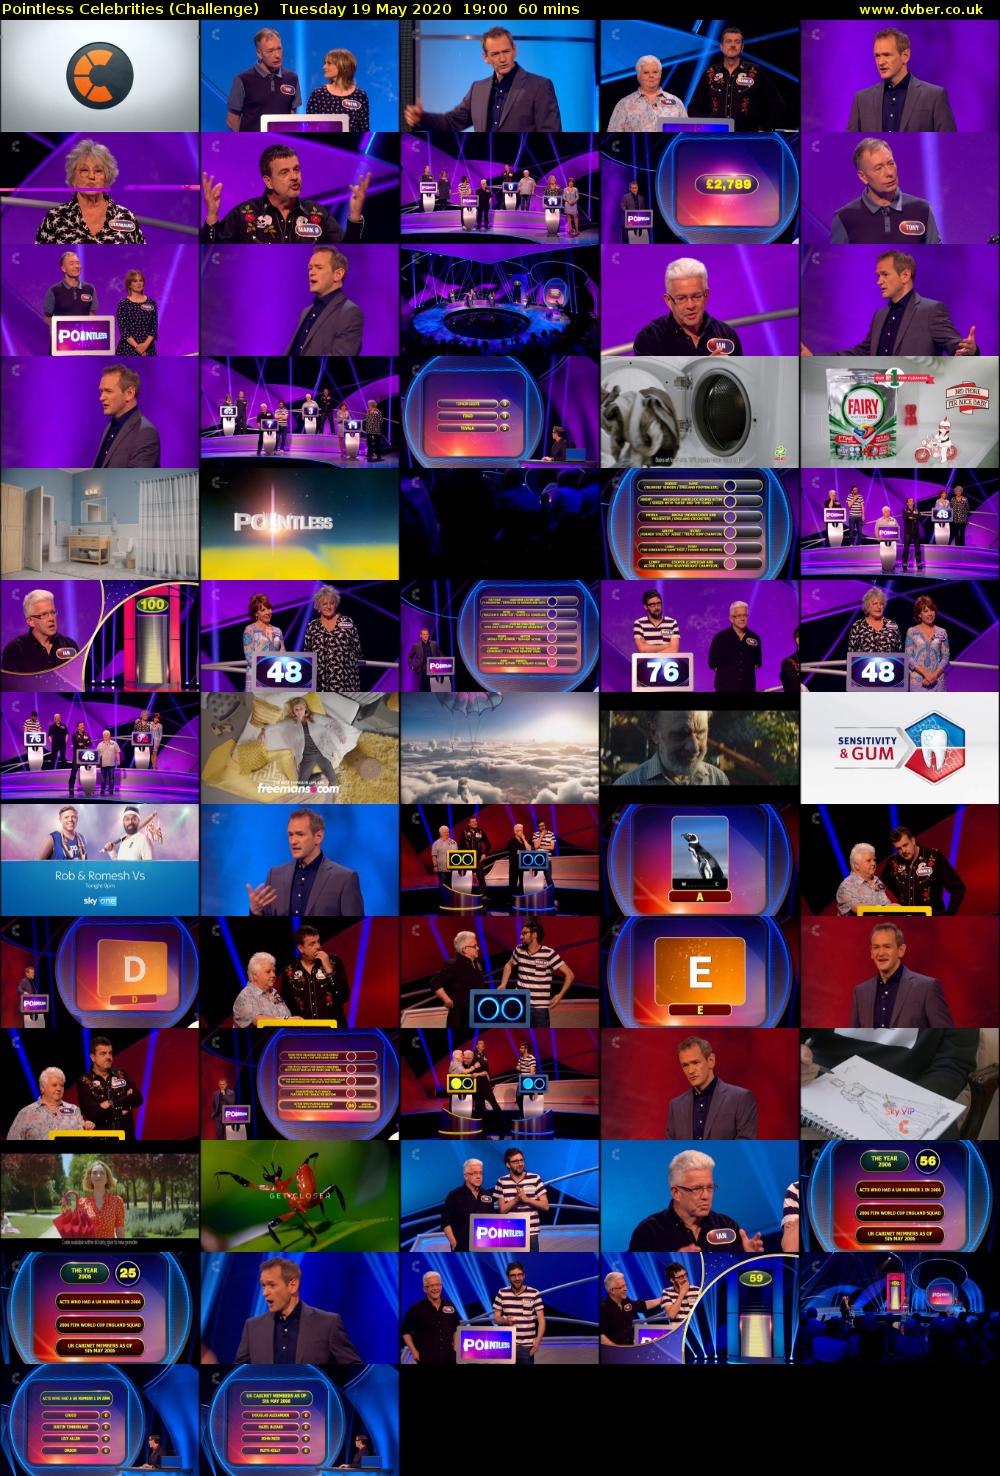 Pointless Celebrities (Challenge) Tuesday 19 May 2020 19:00 - 20:00